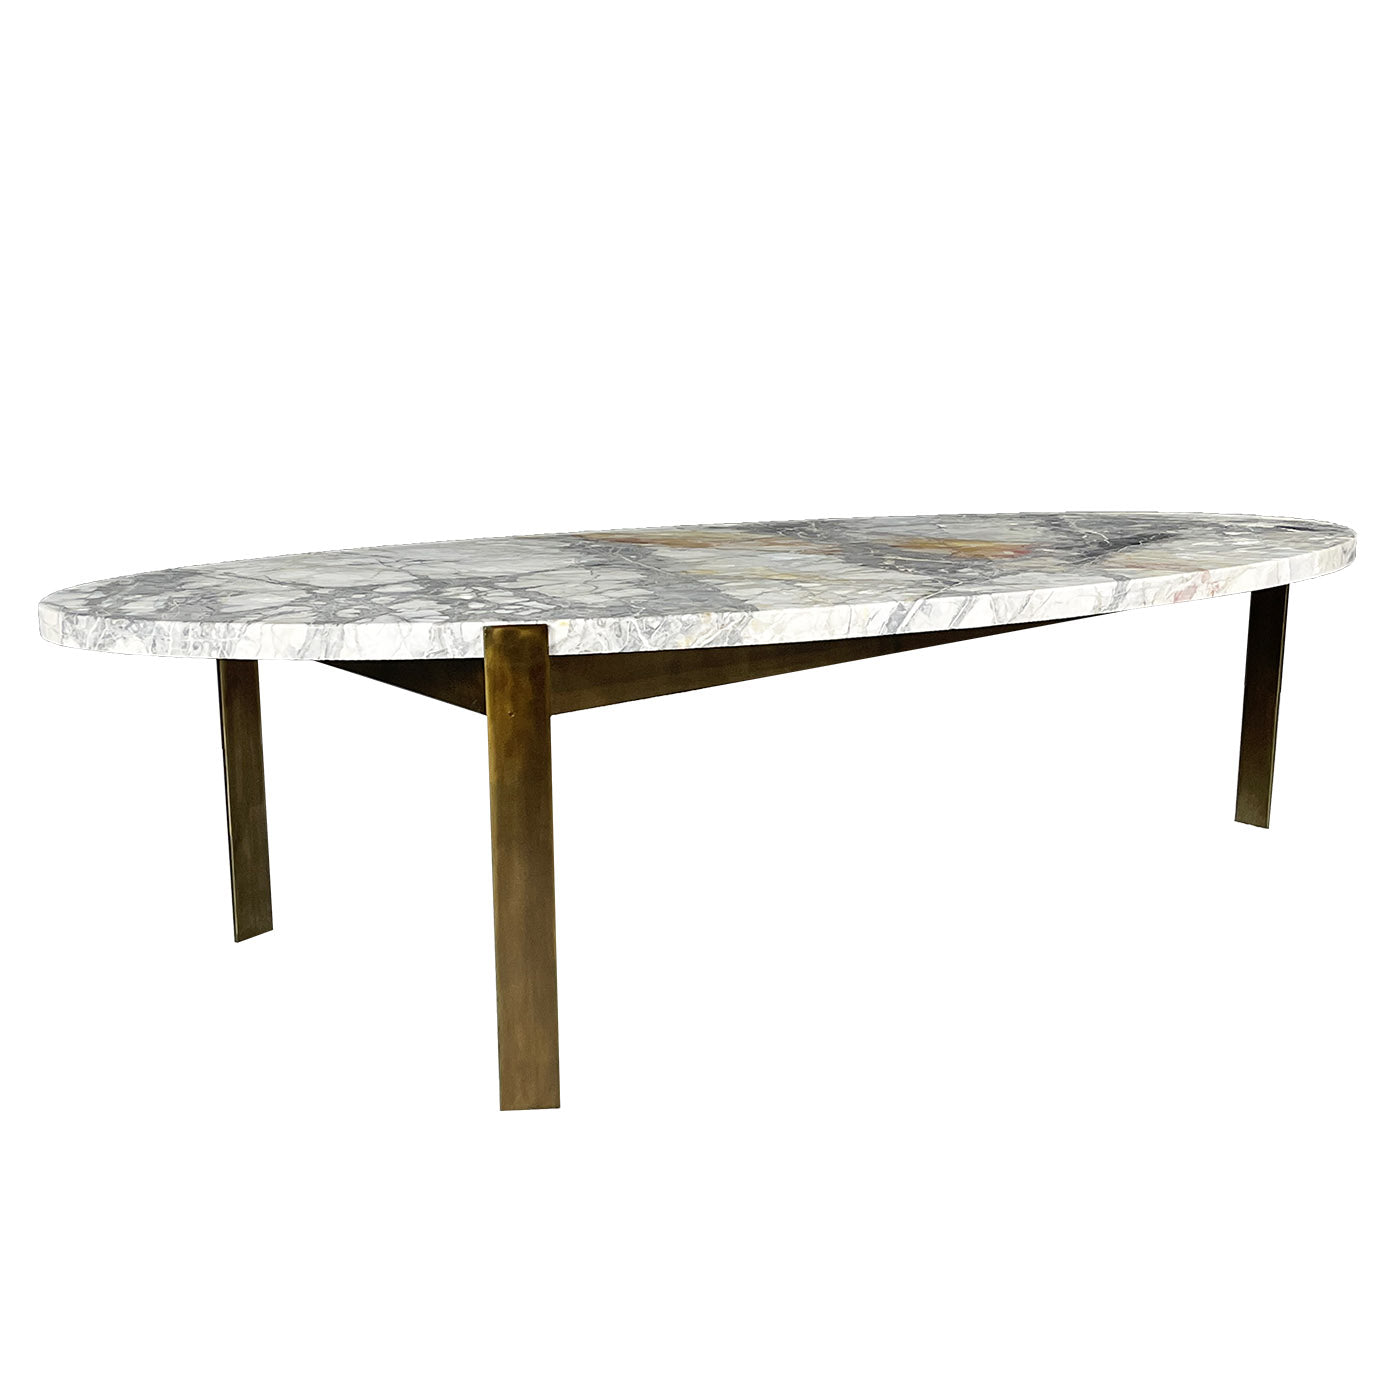 Eneolitica Enry Oval Coffee Table - Alternative view 1